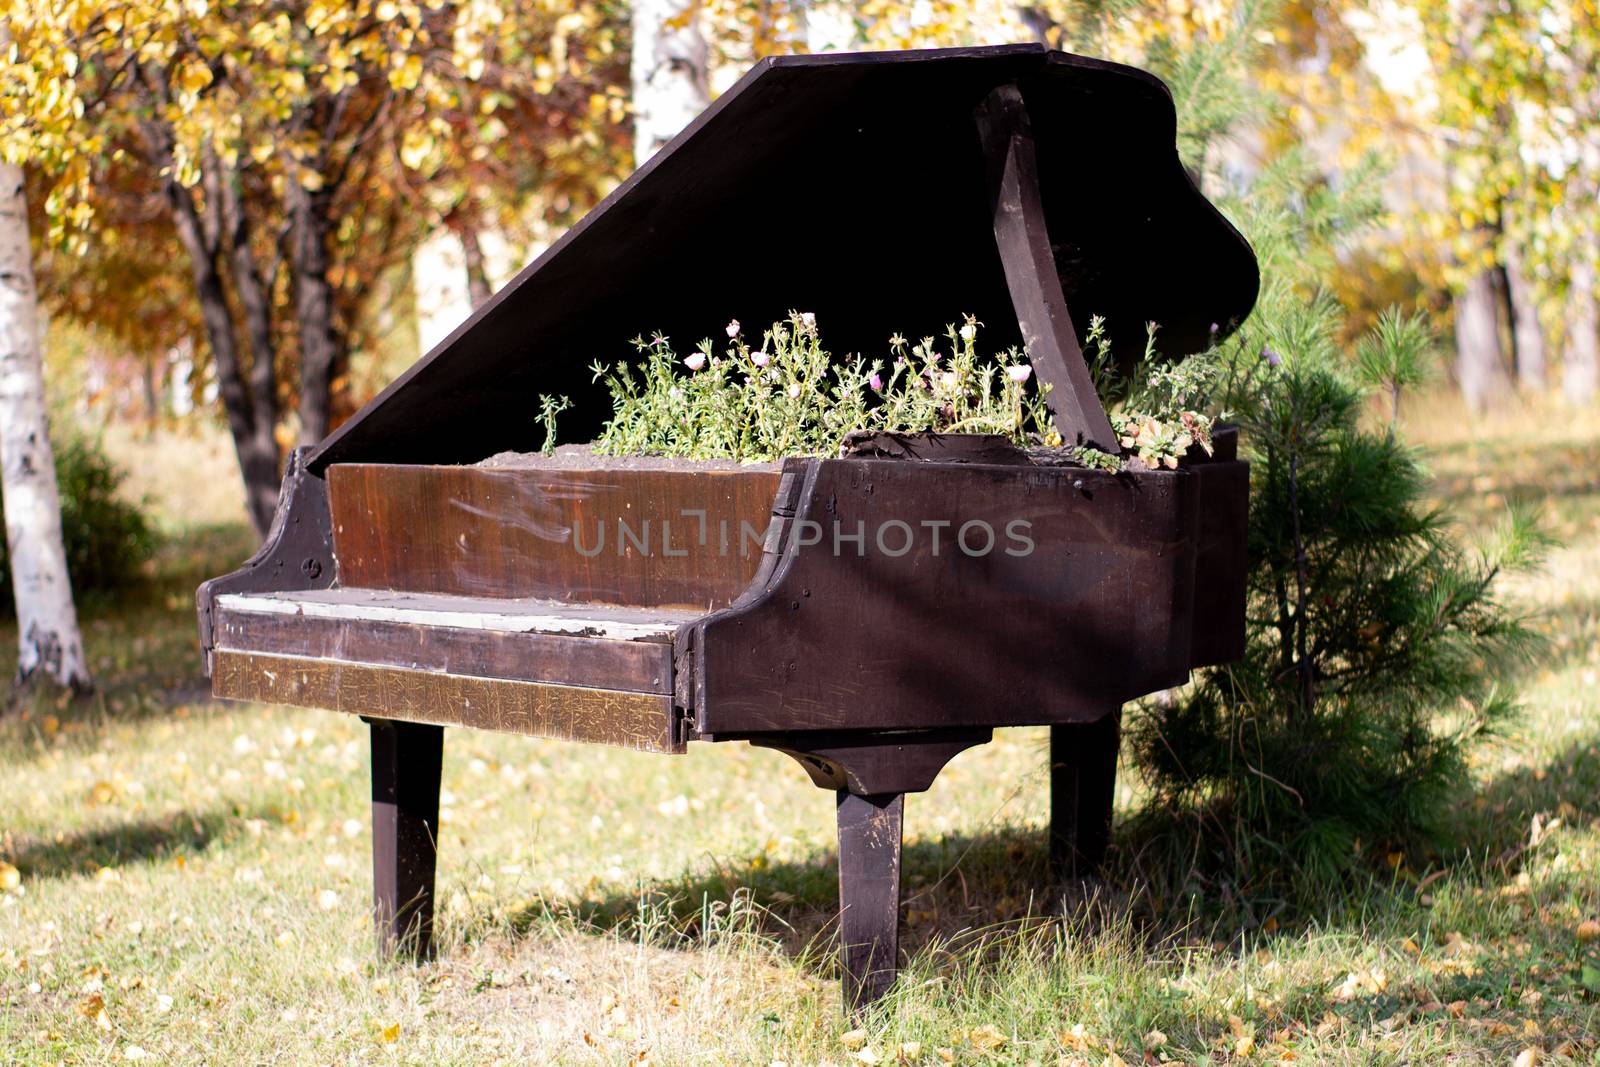 The bed for flowers equipped in an old black piano in the city park. Petunia flowers in an unusual creative bed.